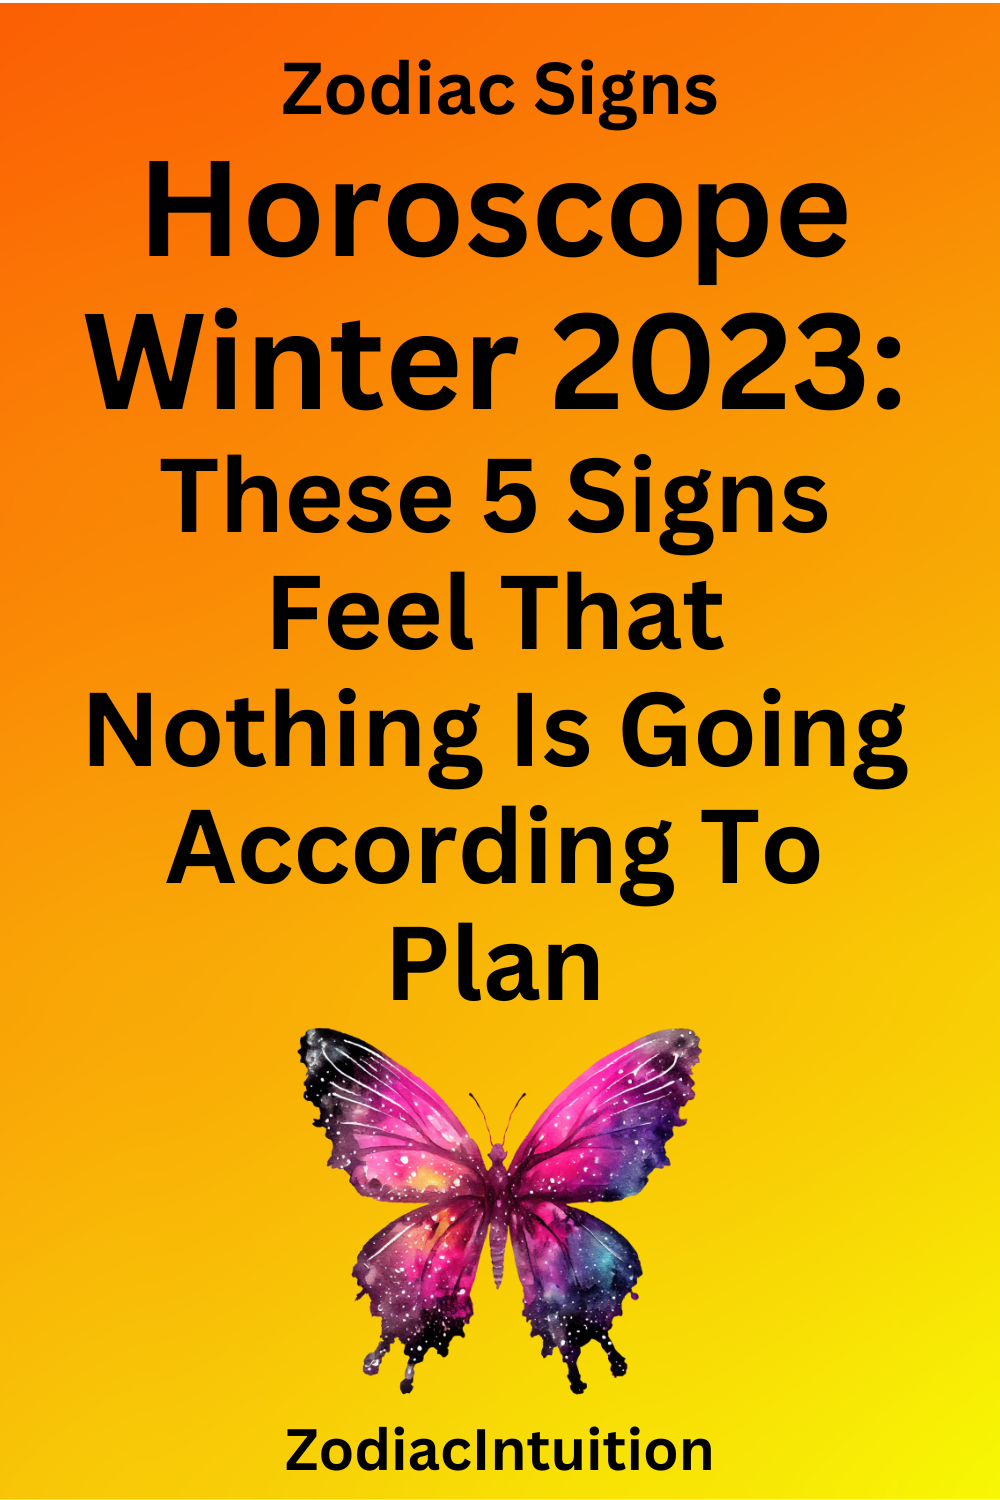 Horoscope Winter 2023: These 5 Signs Feel That Nothing Is Going According To Plan